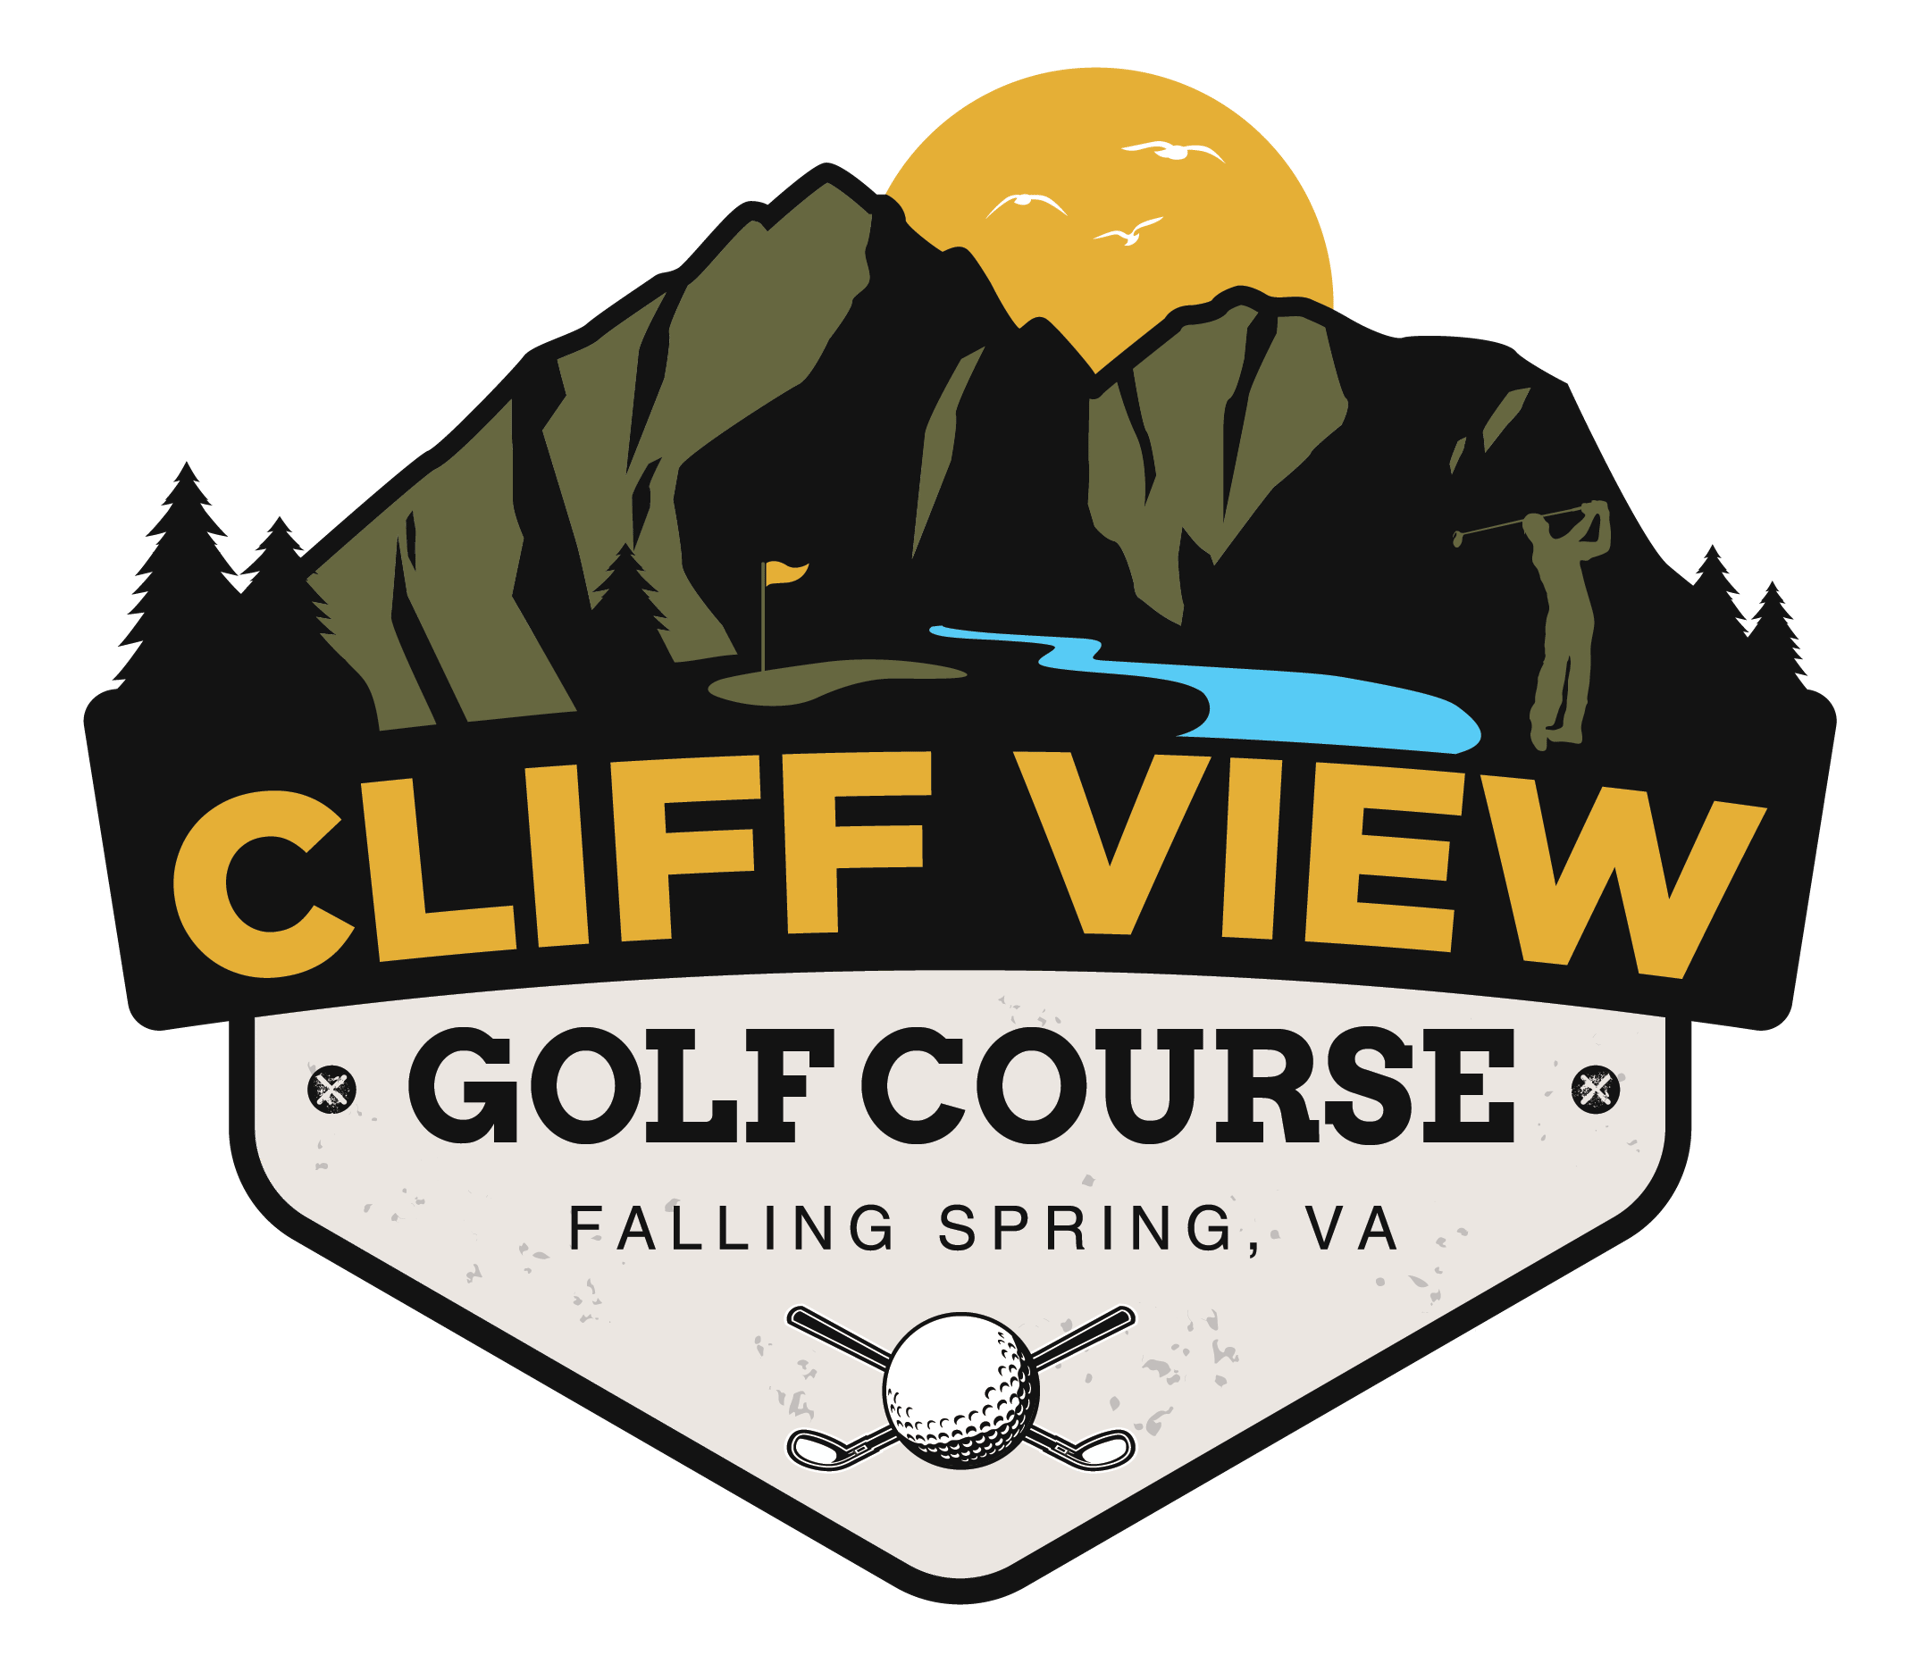 Cliff View Golf Course